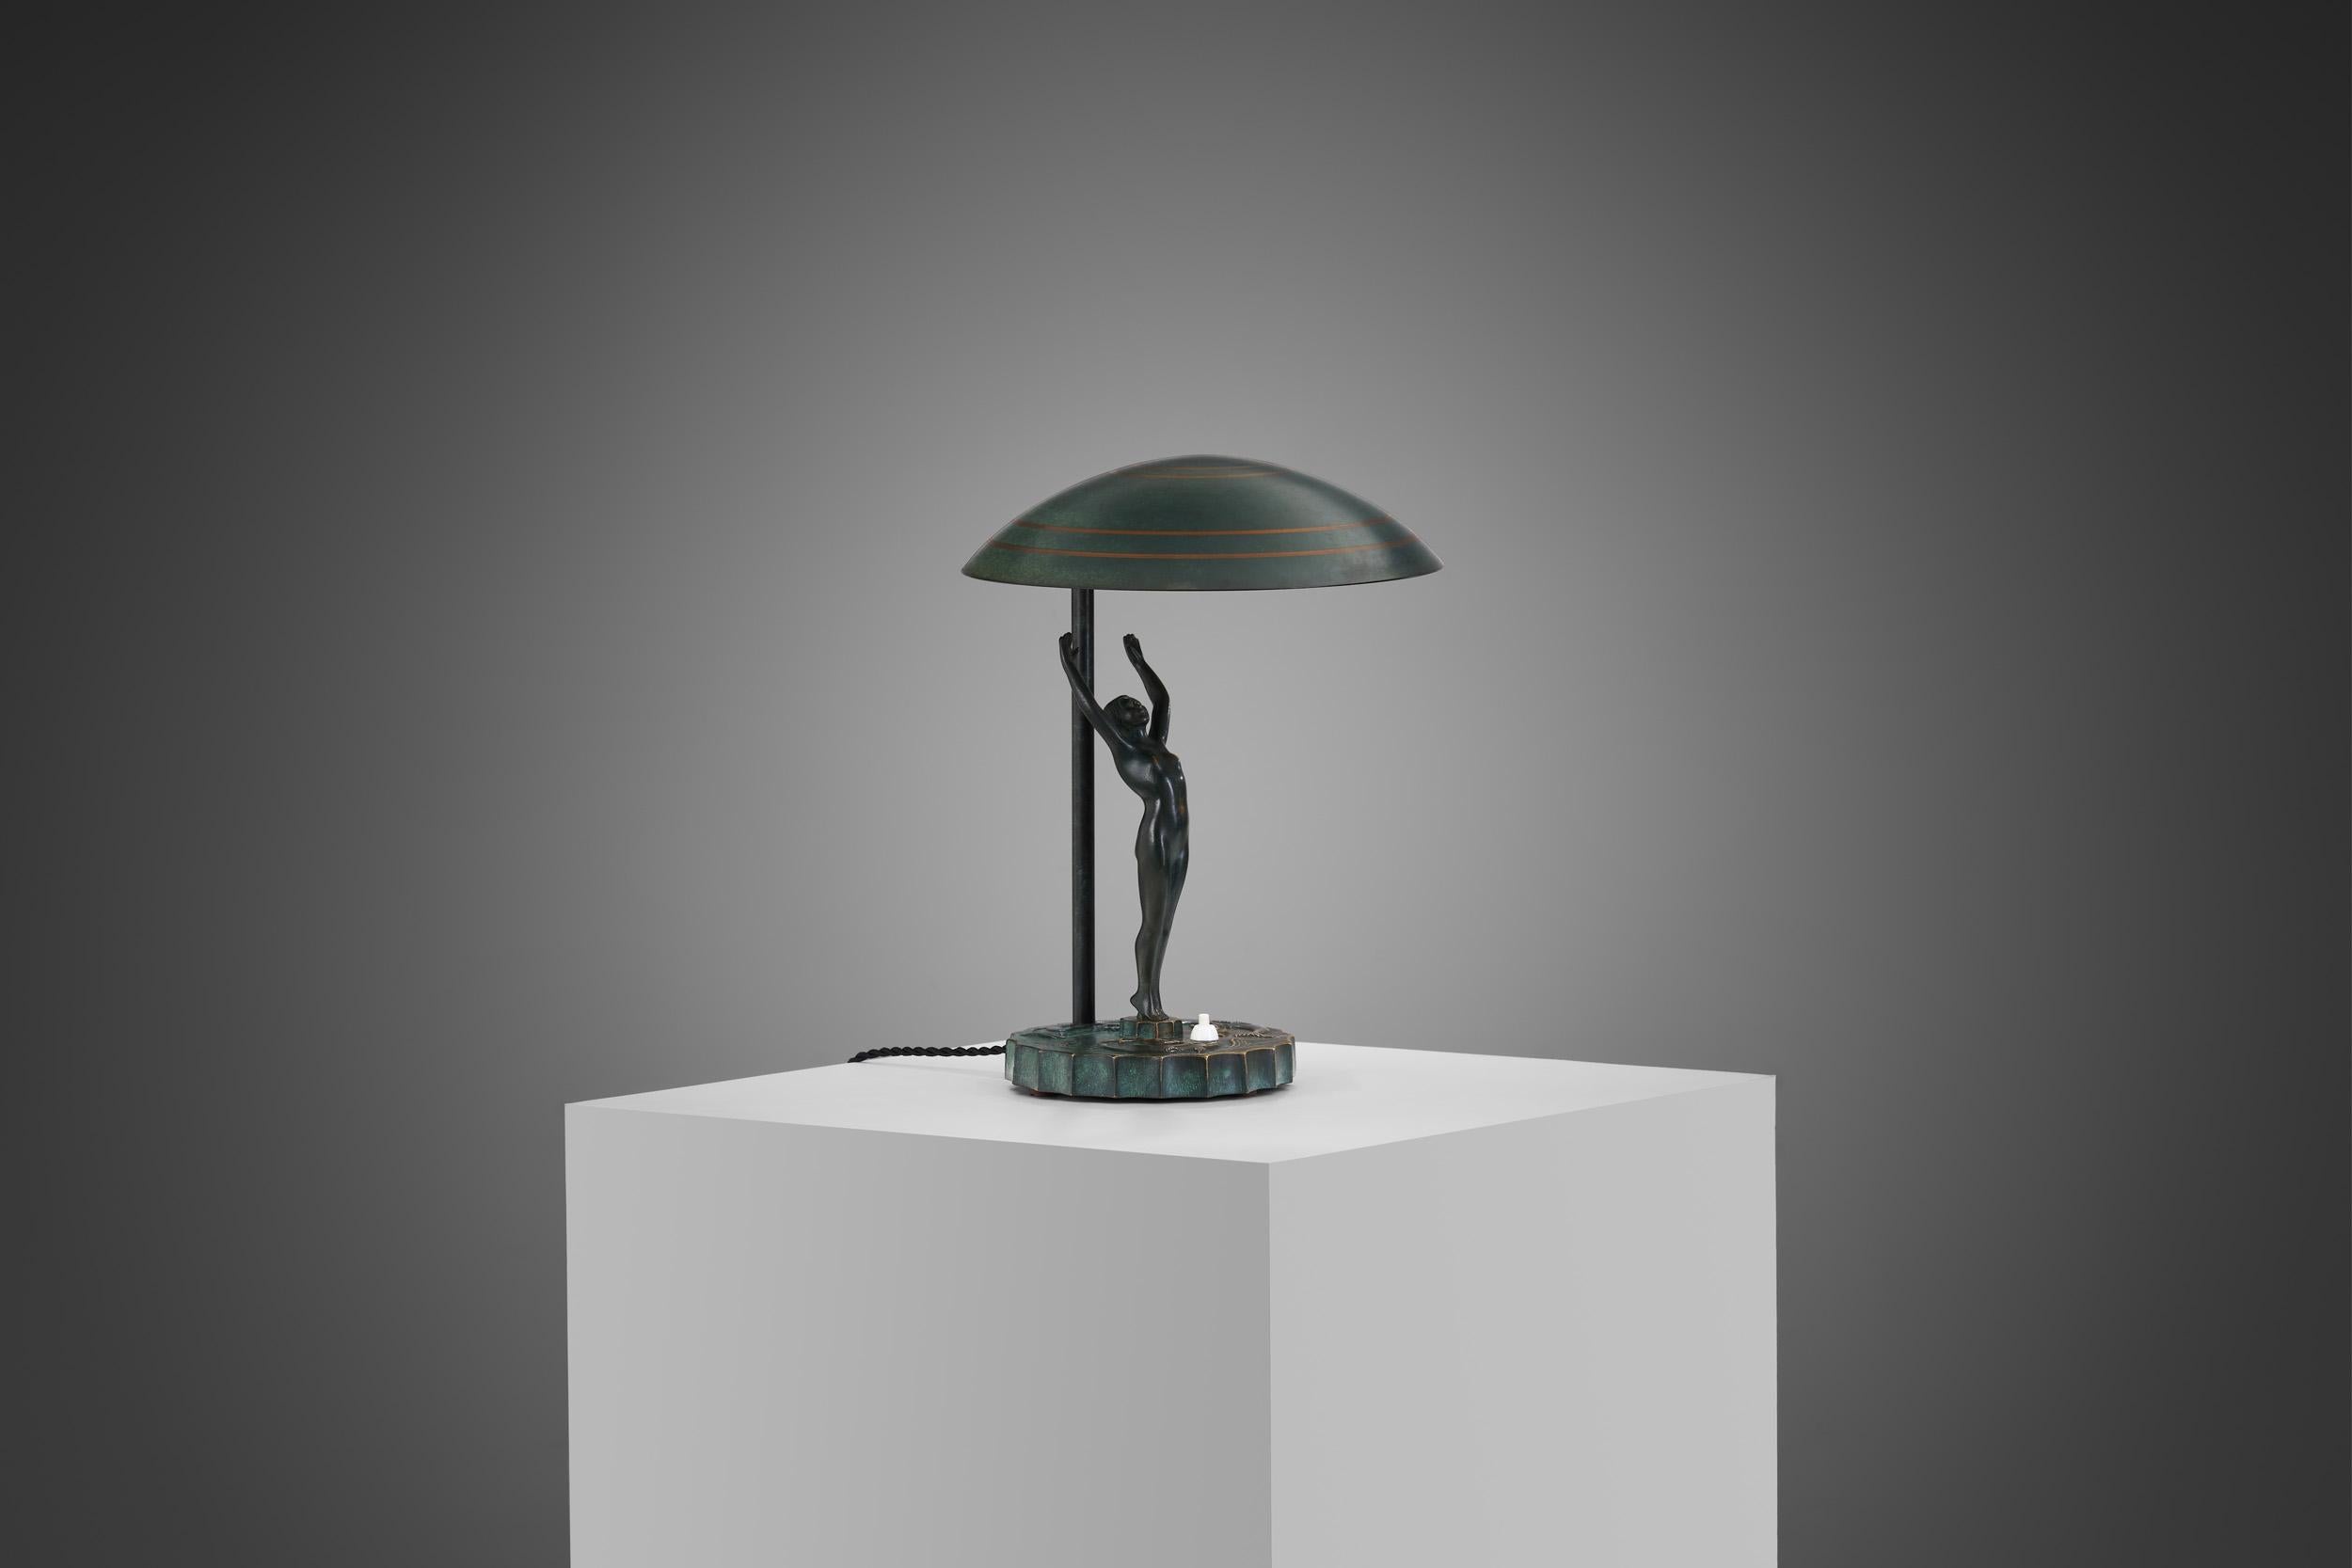 Bronze Art Deco Table Lamp, Europe ca 1930s For Sale 2